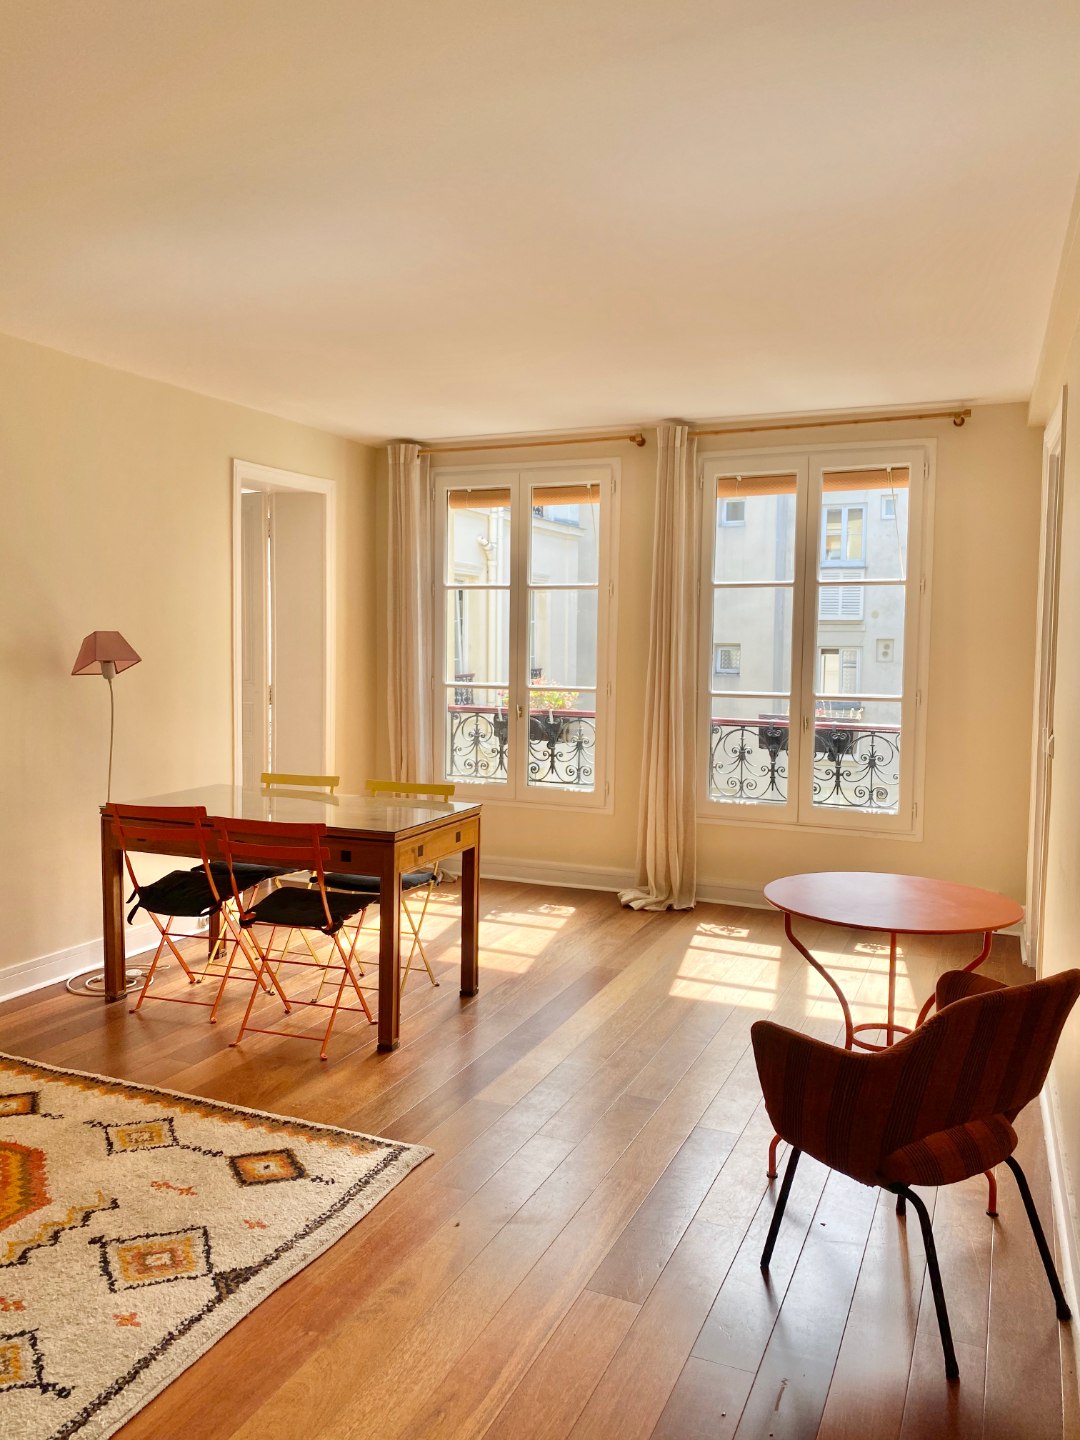 Abbesses / rue Germain Pilon Beau 3 rooms very light and quiet in excellent condition! 2